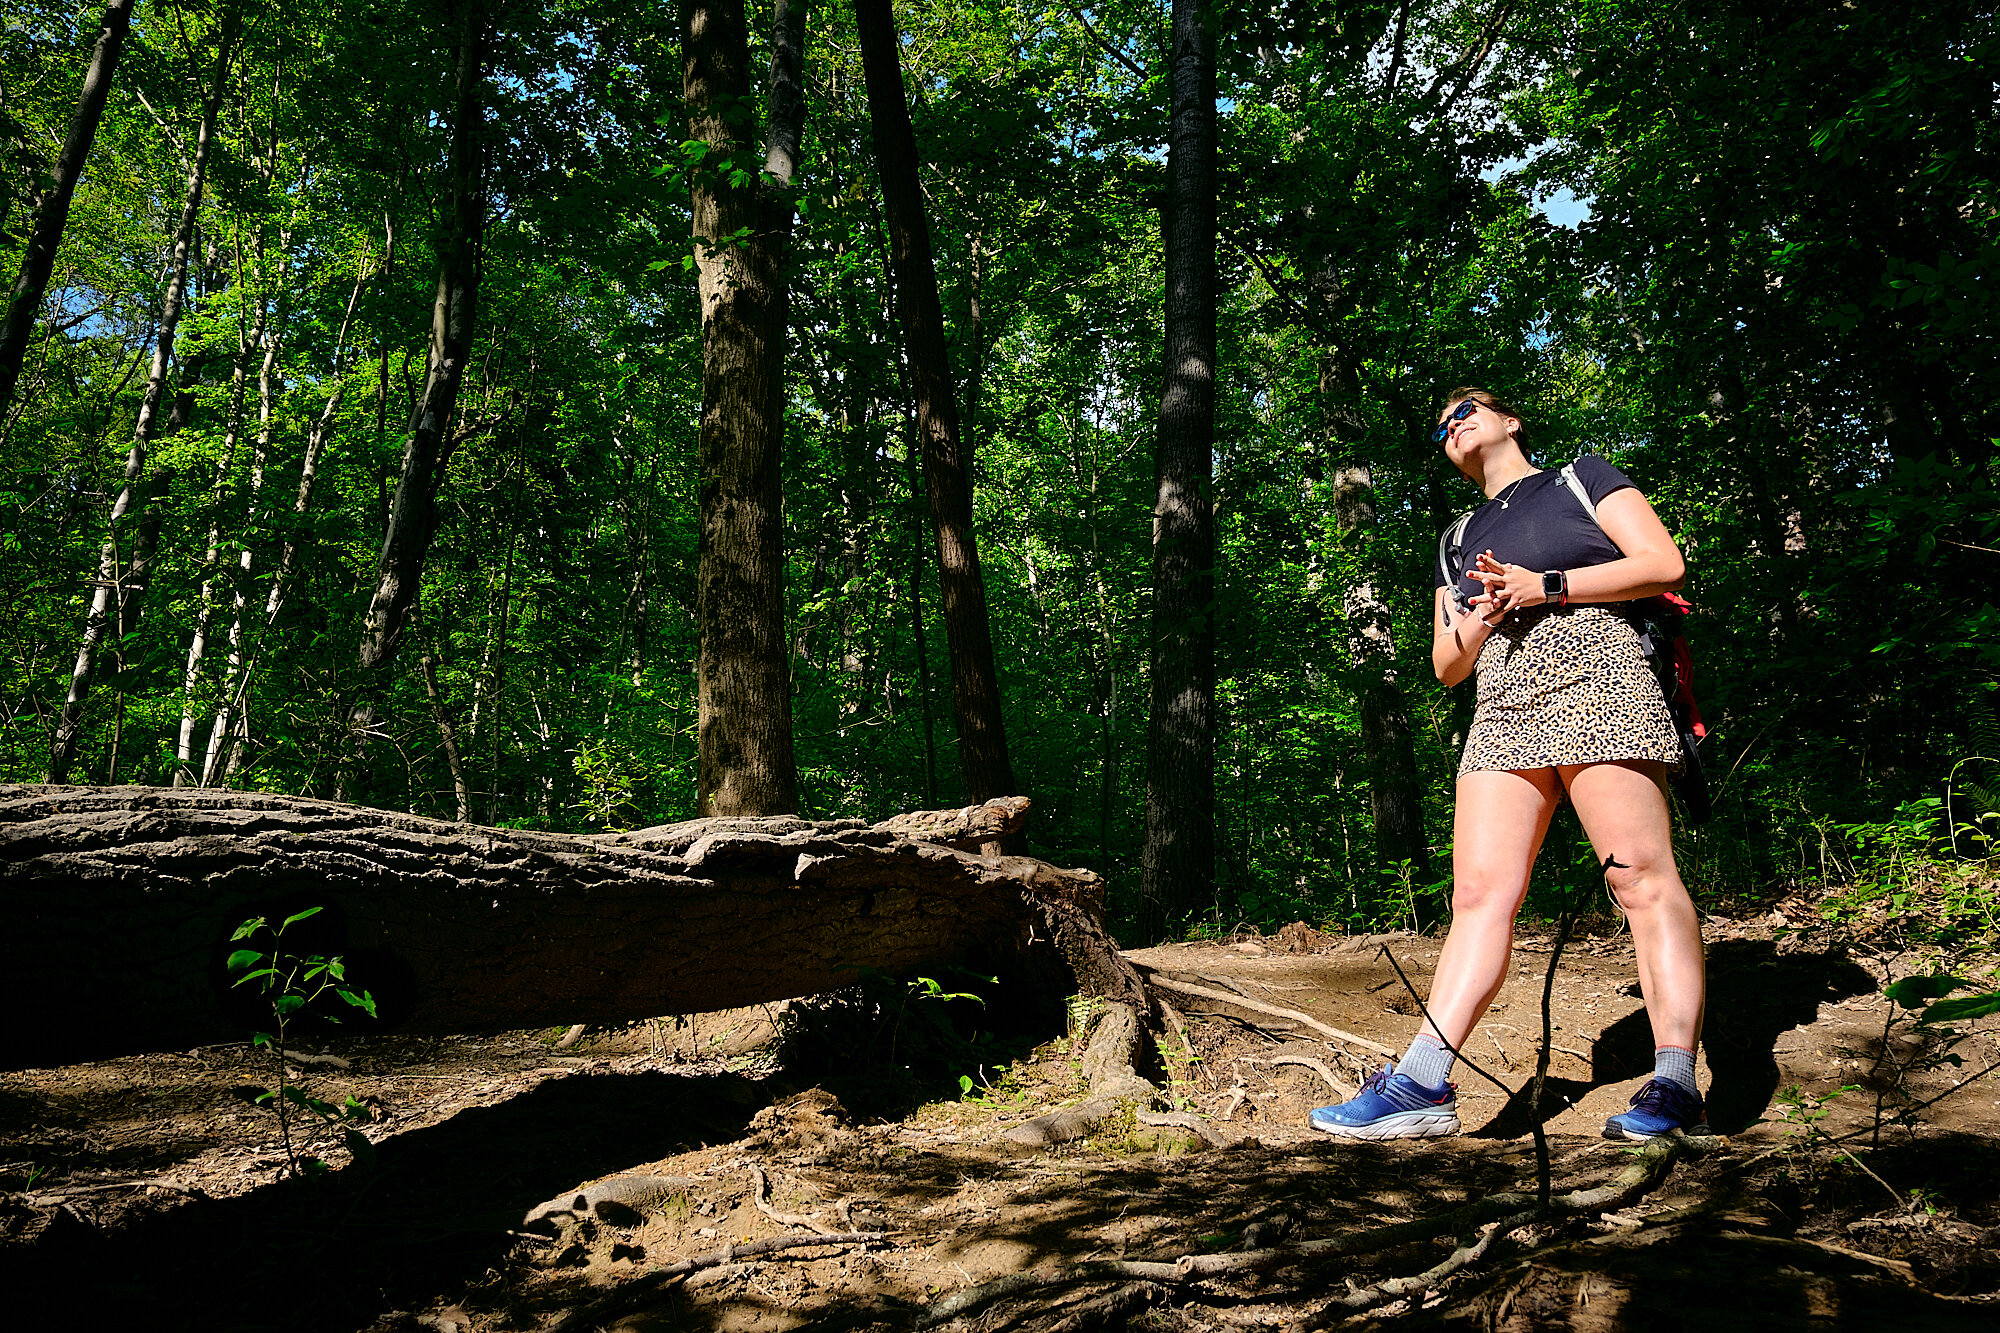  On the way to the backcountry campsite in Sells Park, Hannah pauses to enjoy the sounds and smells of spring. | 5/16/20 Athens, OH 